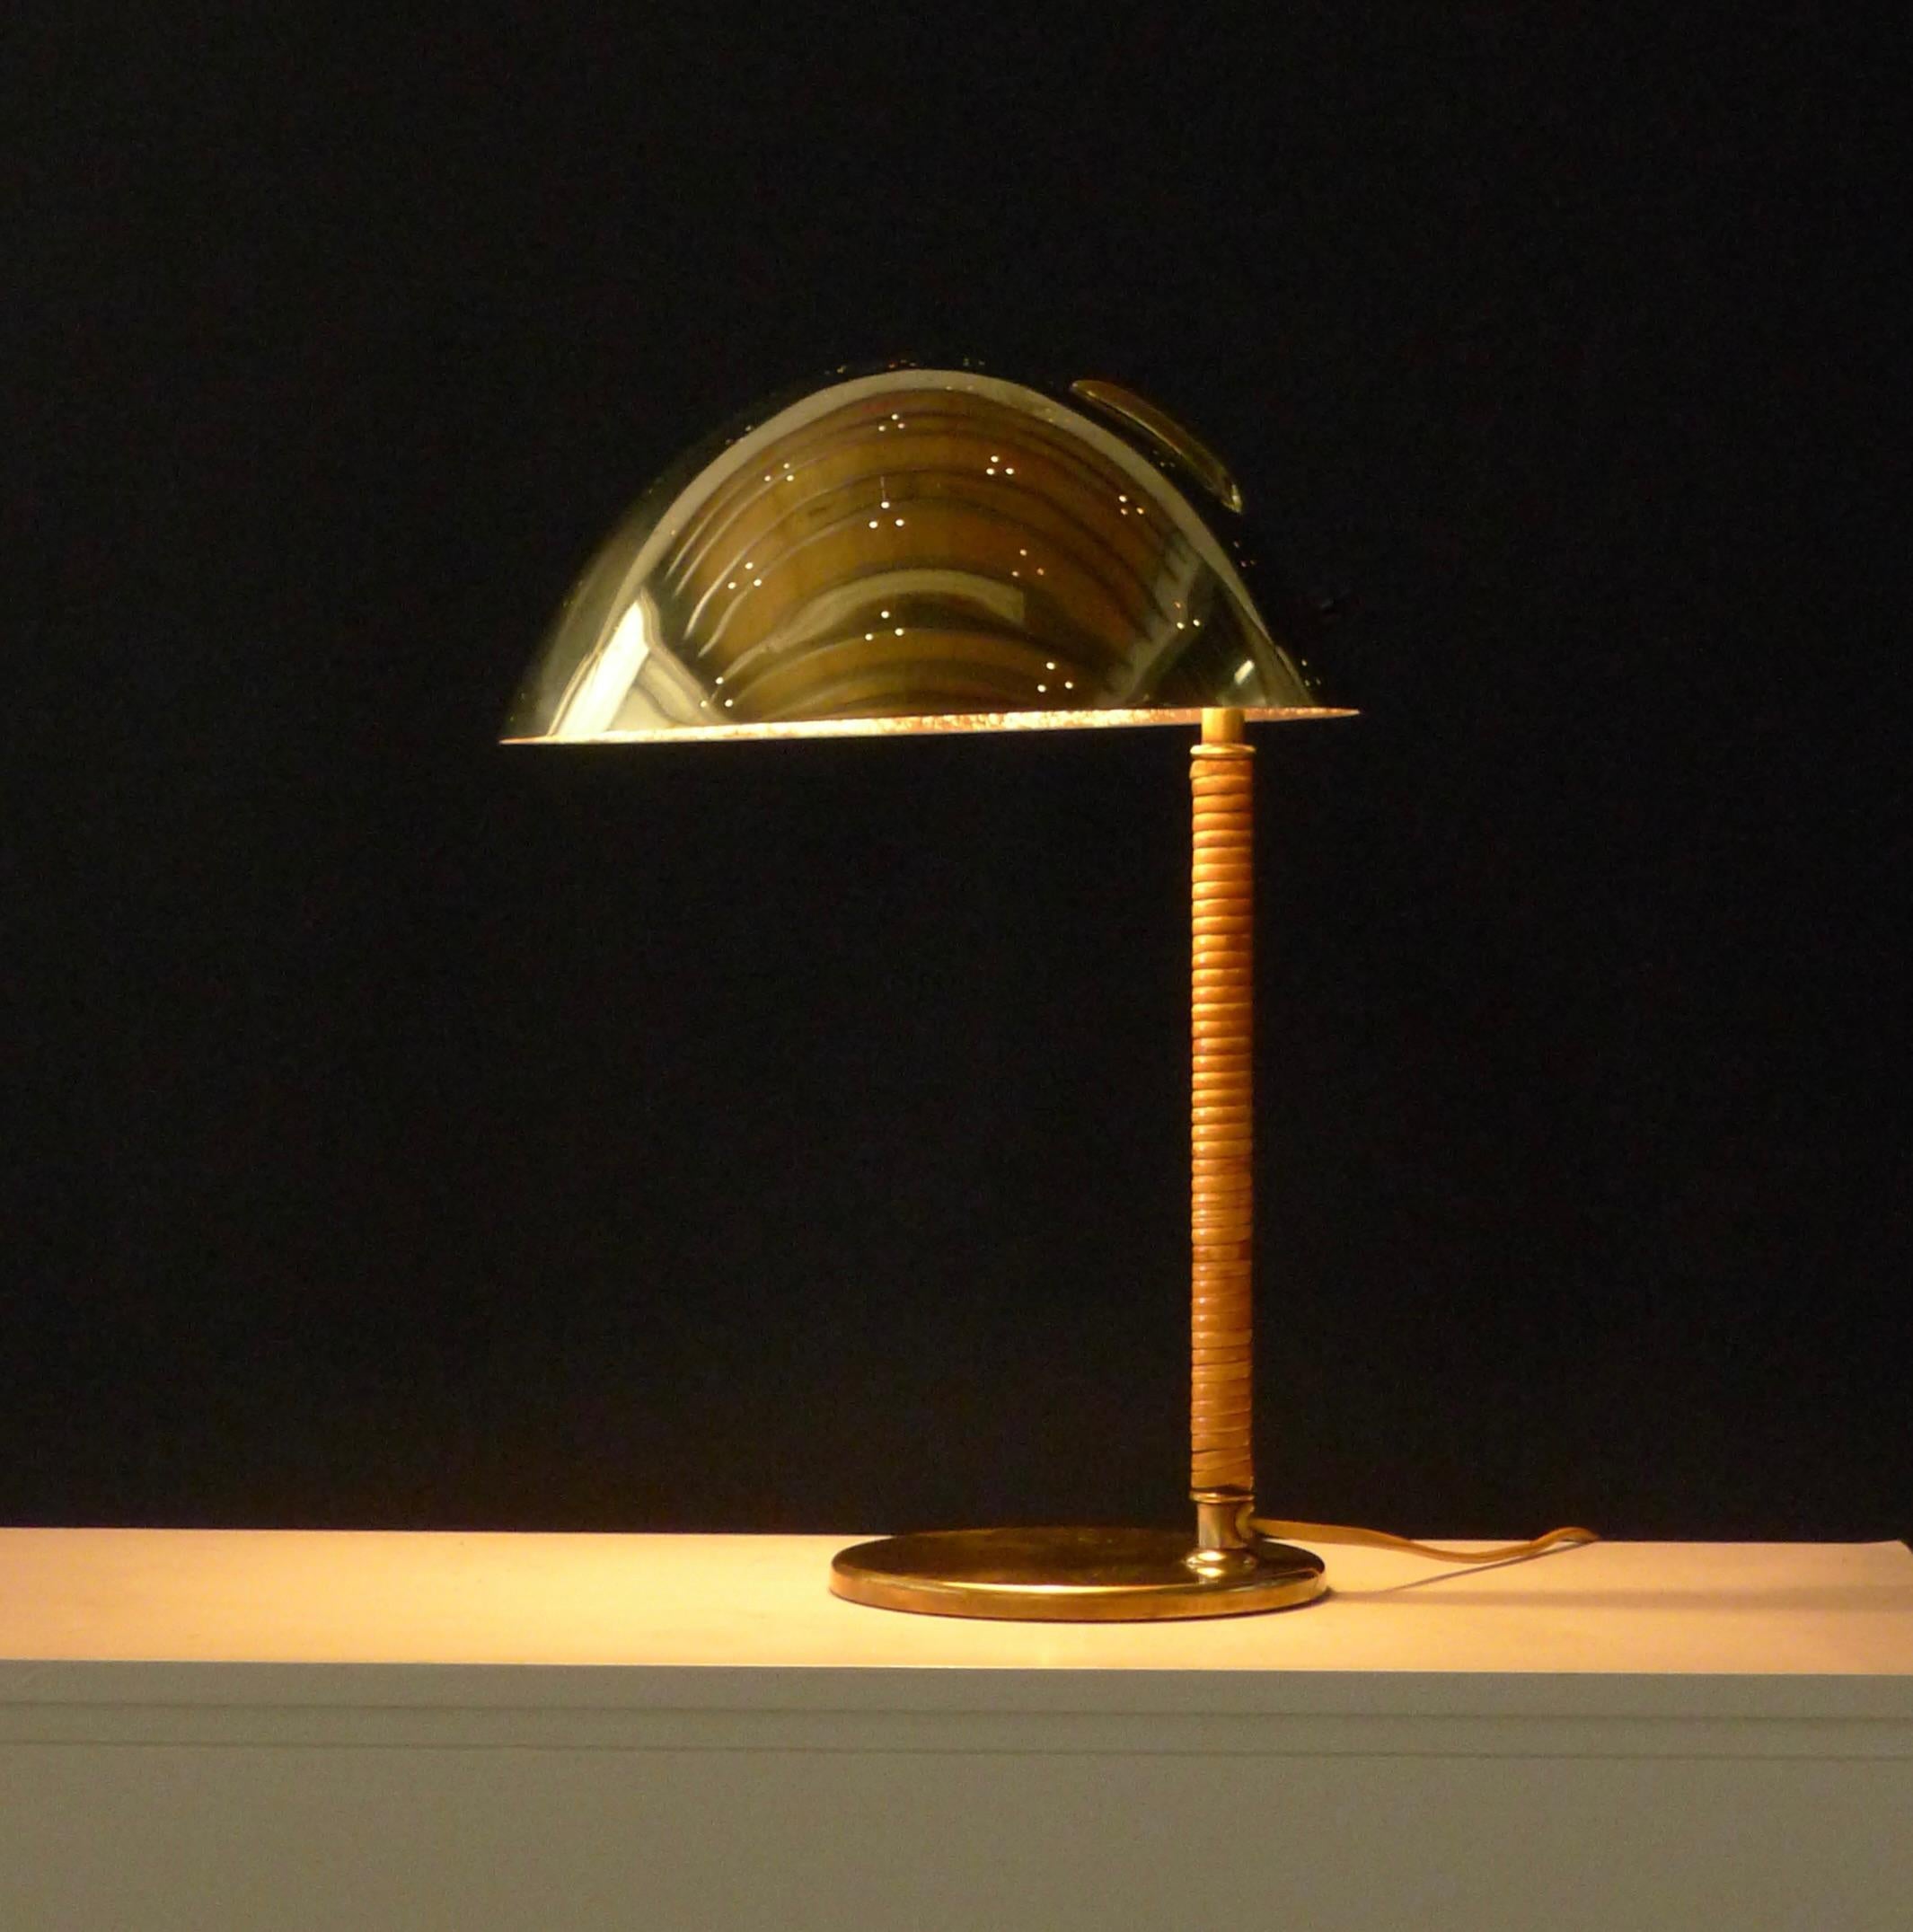 Paavo Tynell, Kypärä (or helmet) table lamp or desk light, model 9209, in brass with perforated domed shade and rattan wrapped stem, 40cm high, 26cm wide

The interior of the shade has been sprayed white at some point and there is speckling where it